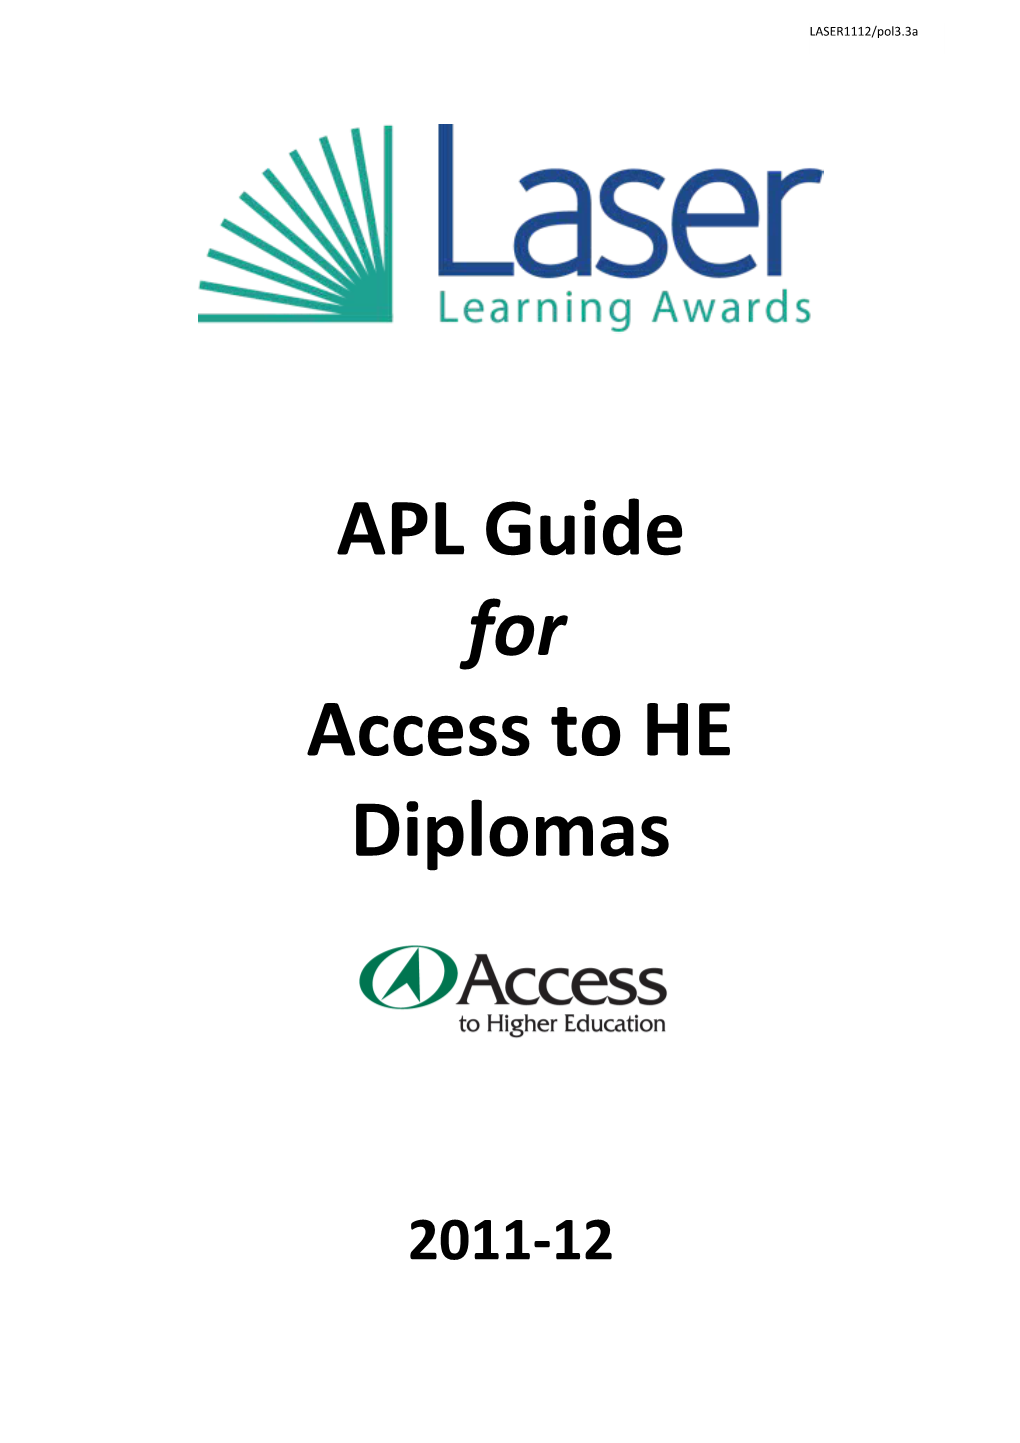 APL Guide for Access to HE Diplomas